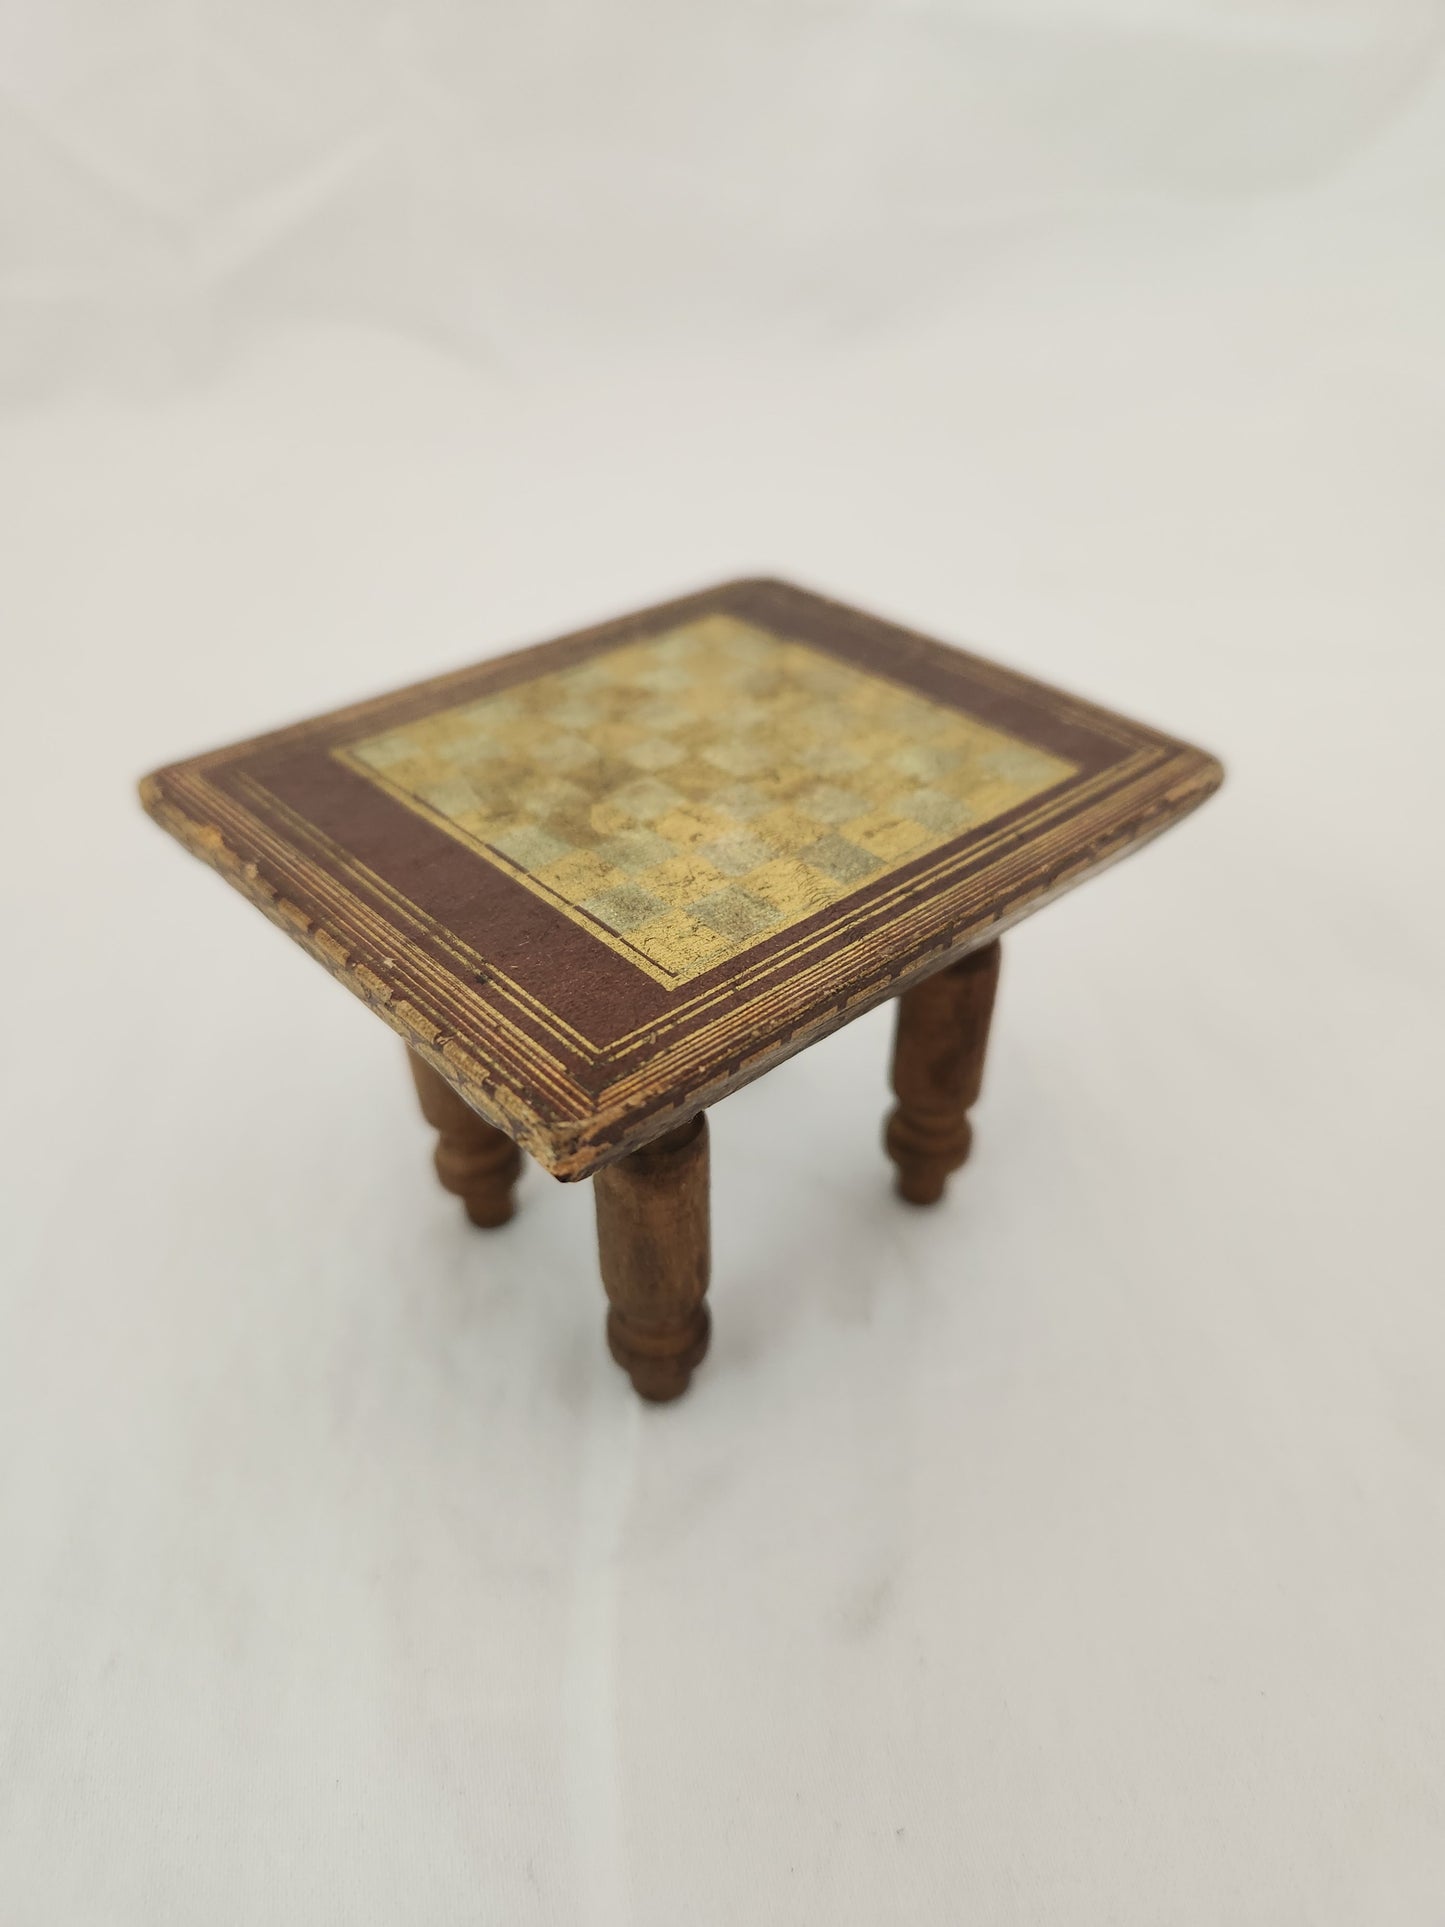 VTG - Bliss Co. Lithographed Dollhouse Chess Table - RARE